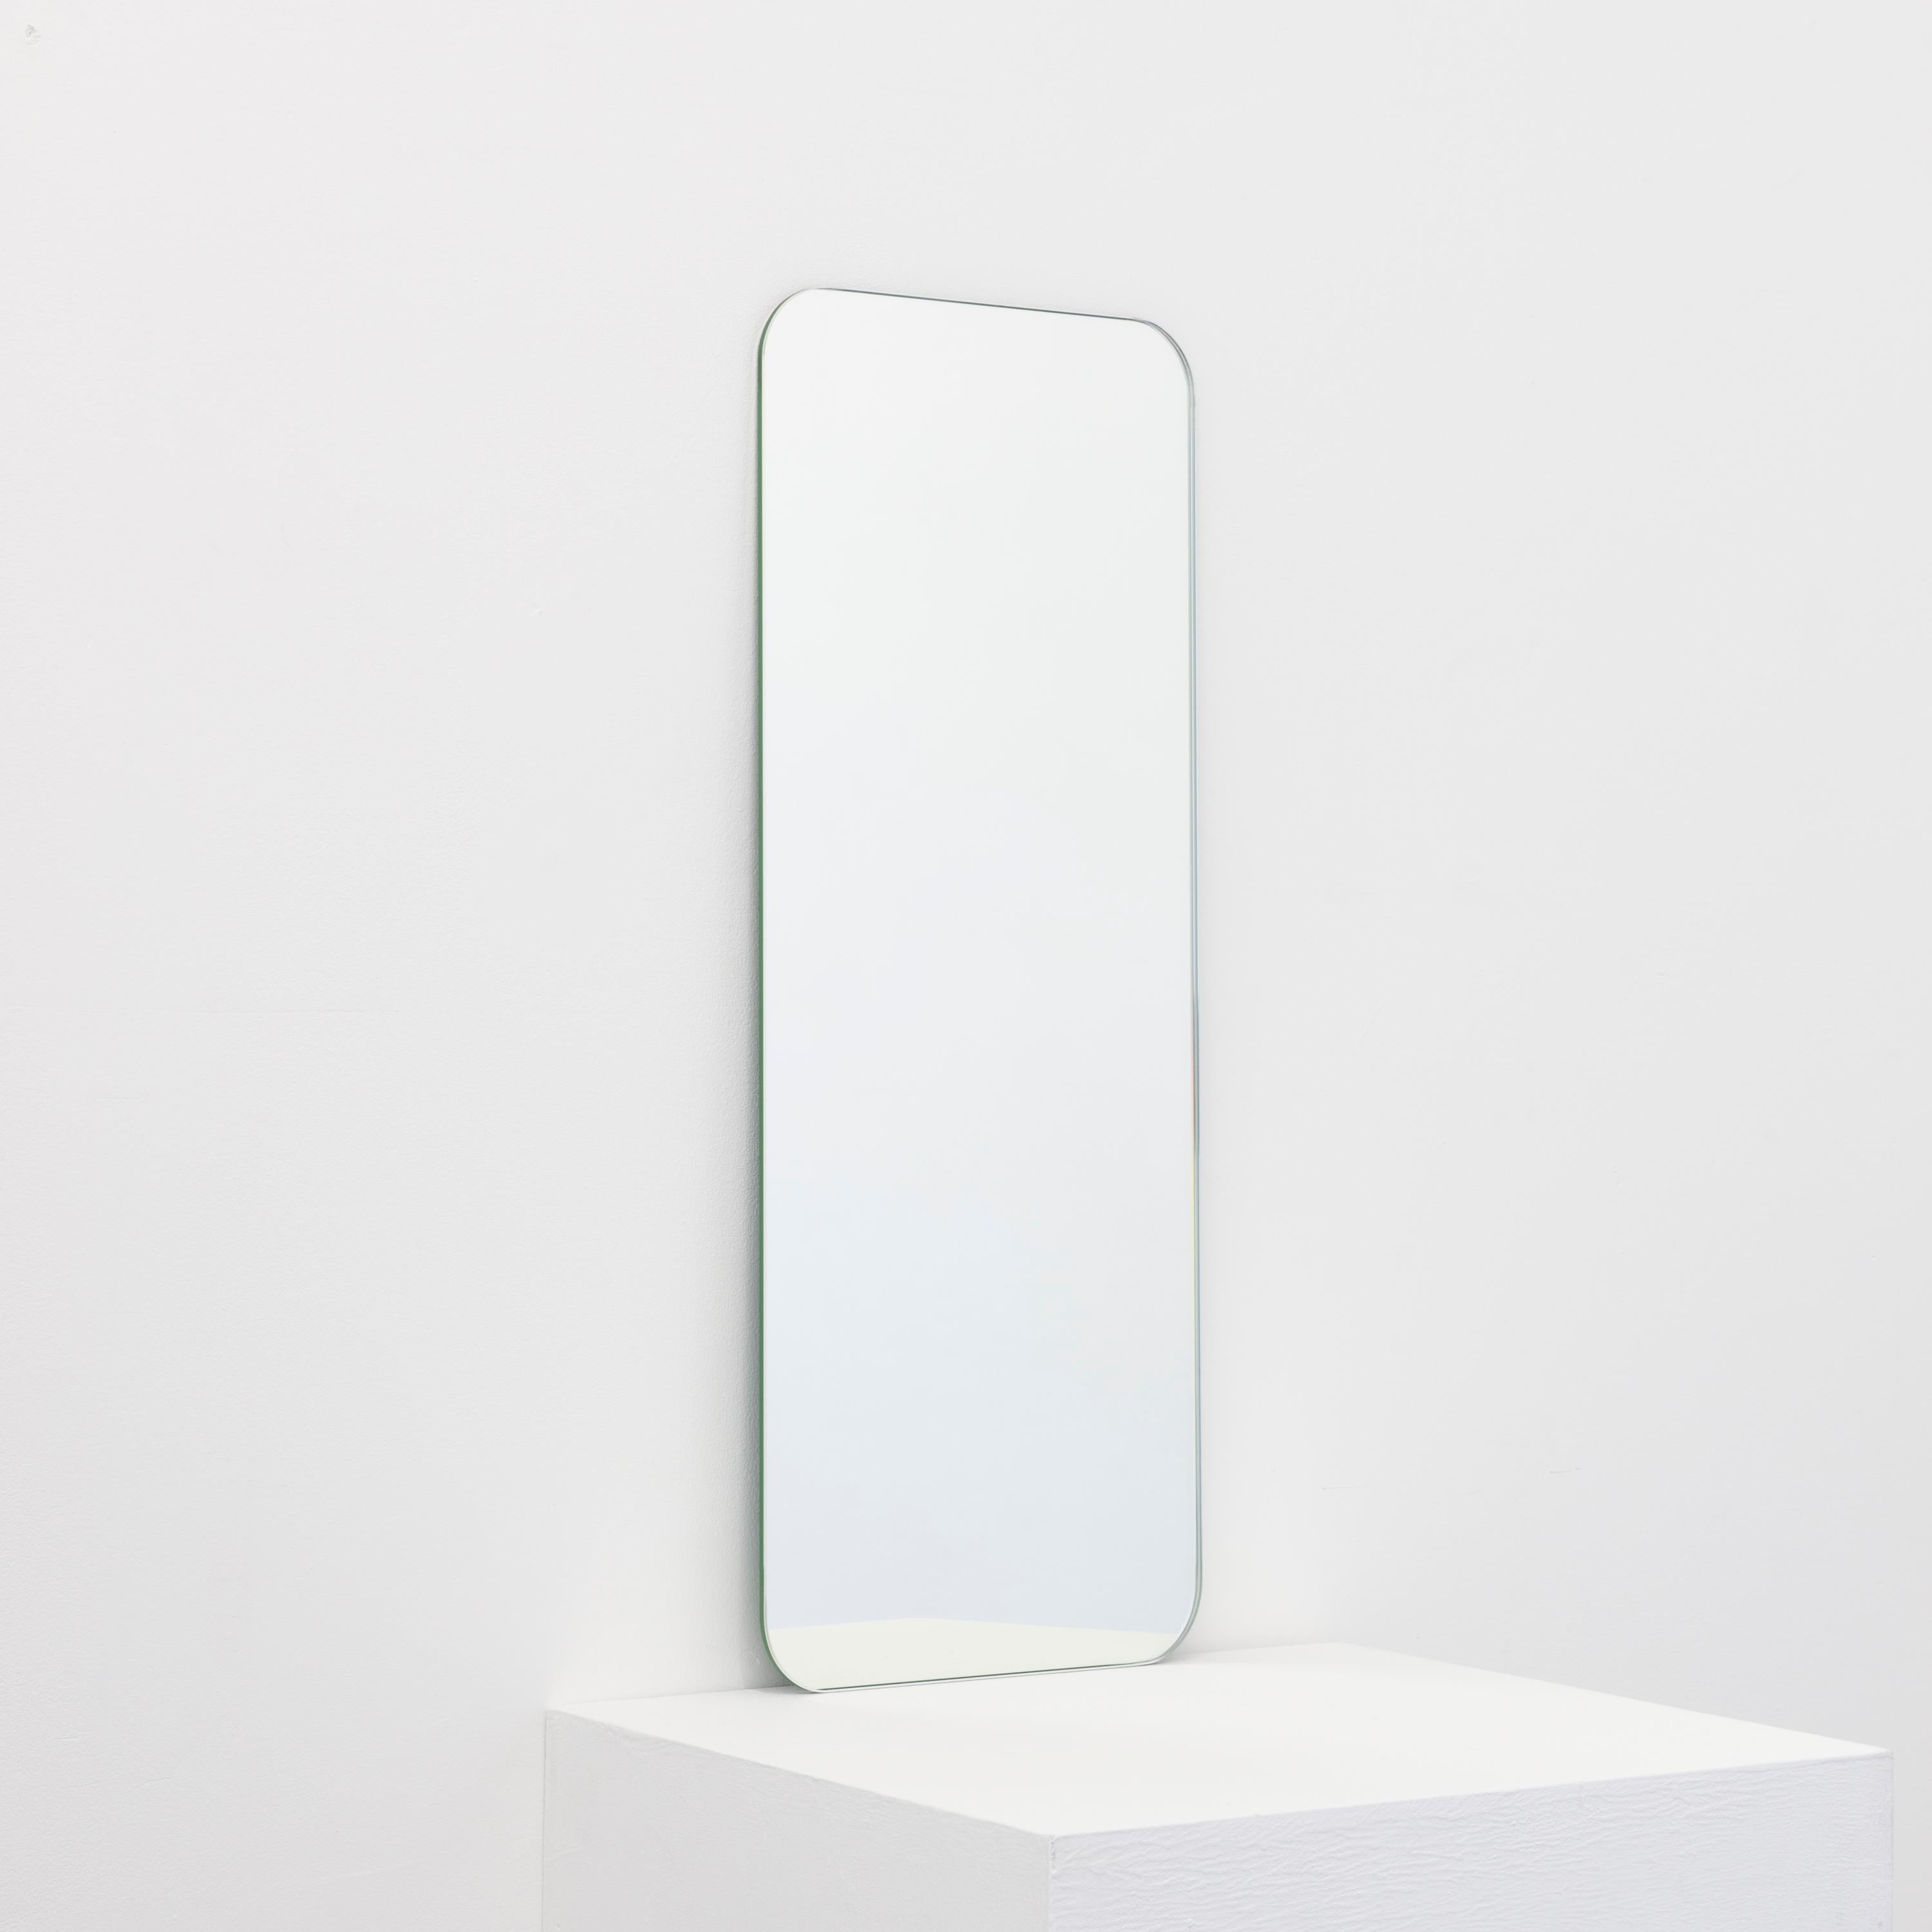 Minimalist rectangular shaped frameless mirror with a floating effect. Quality design that ensures the mirror sits perfectly parallel to the wall. Designed and made in London, UK.

Fitted with professional plates not visible once installed for an